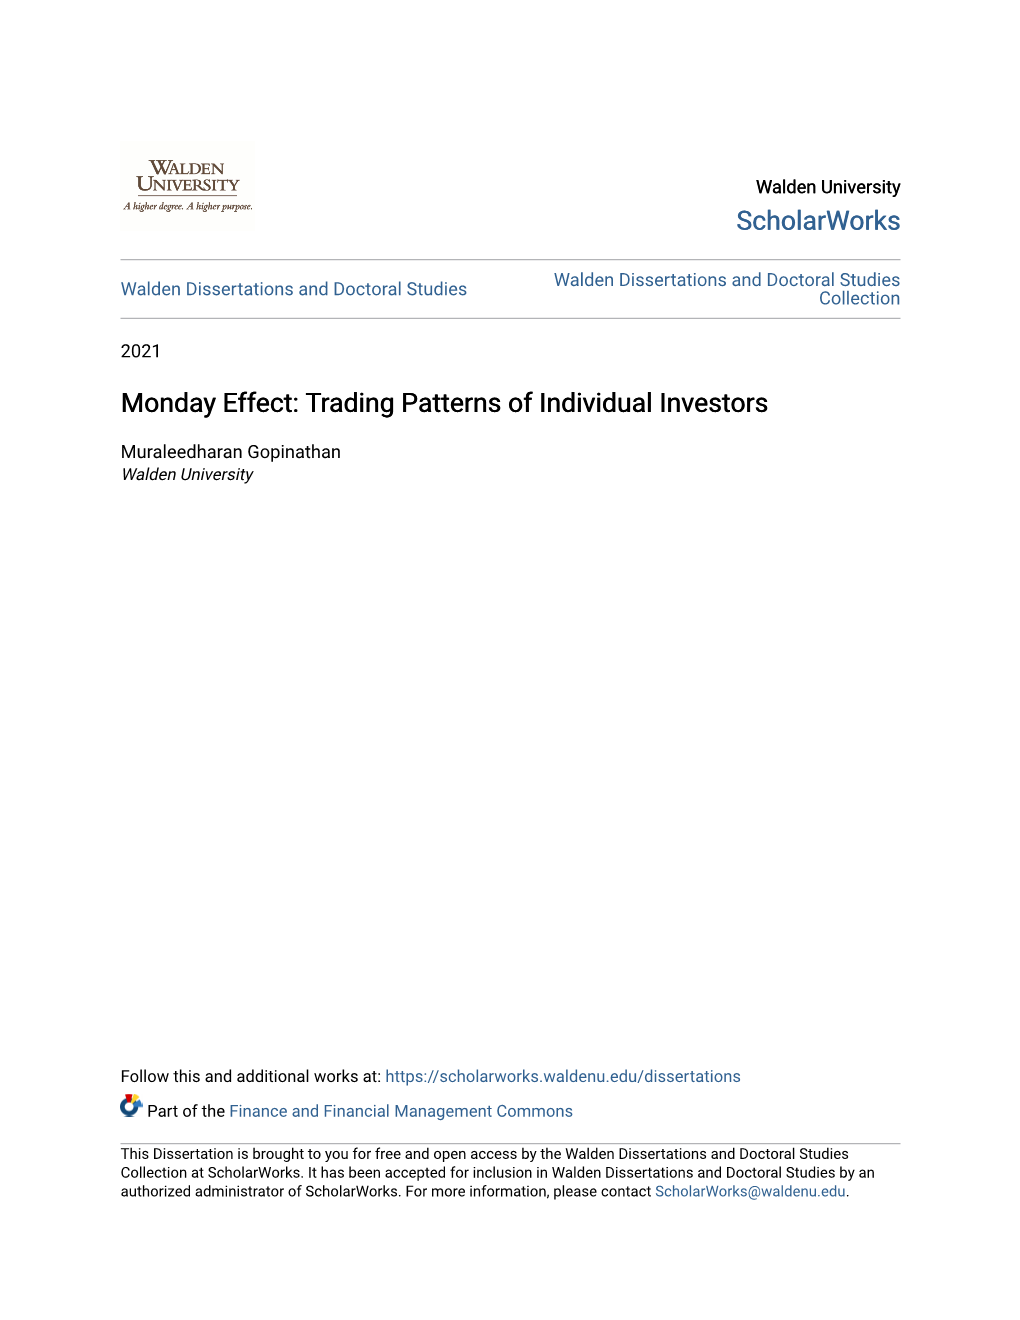 Monday Effect: Trading Patterns of Individual Investors